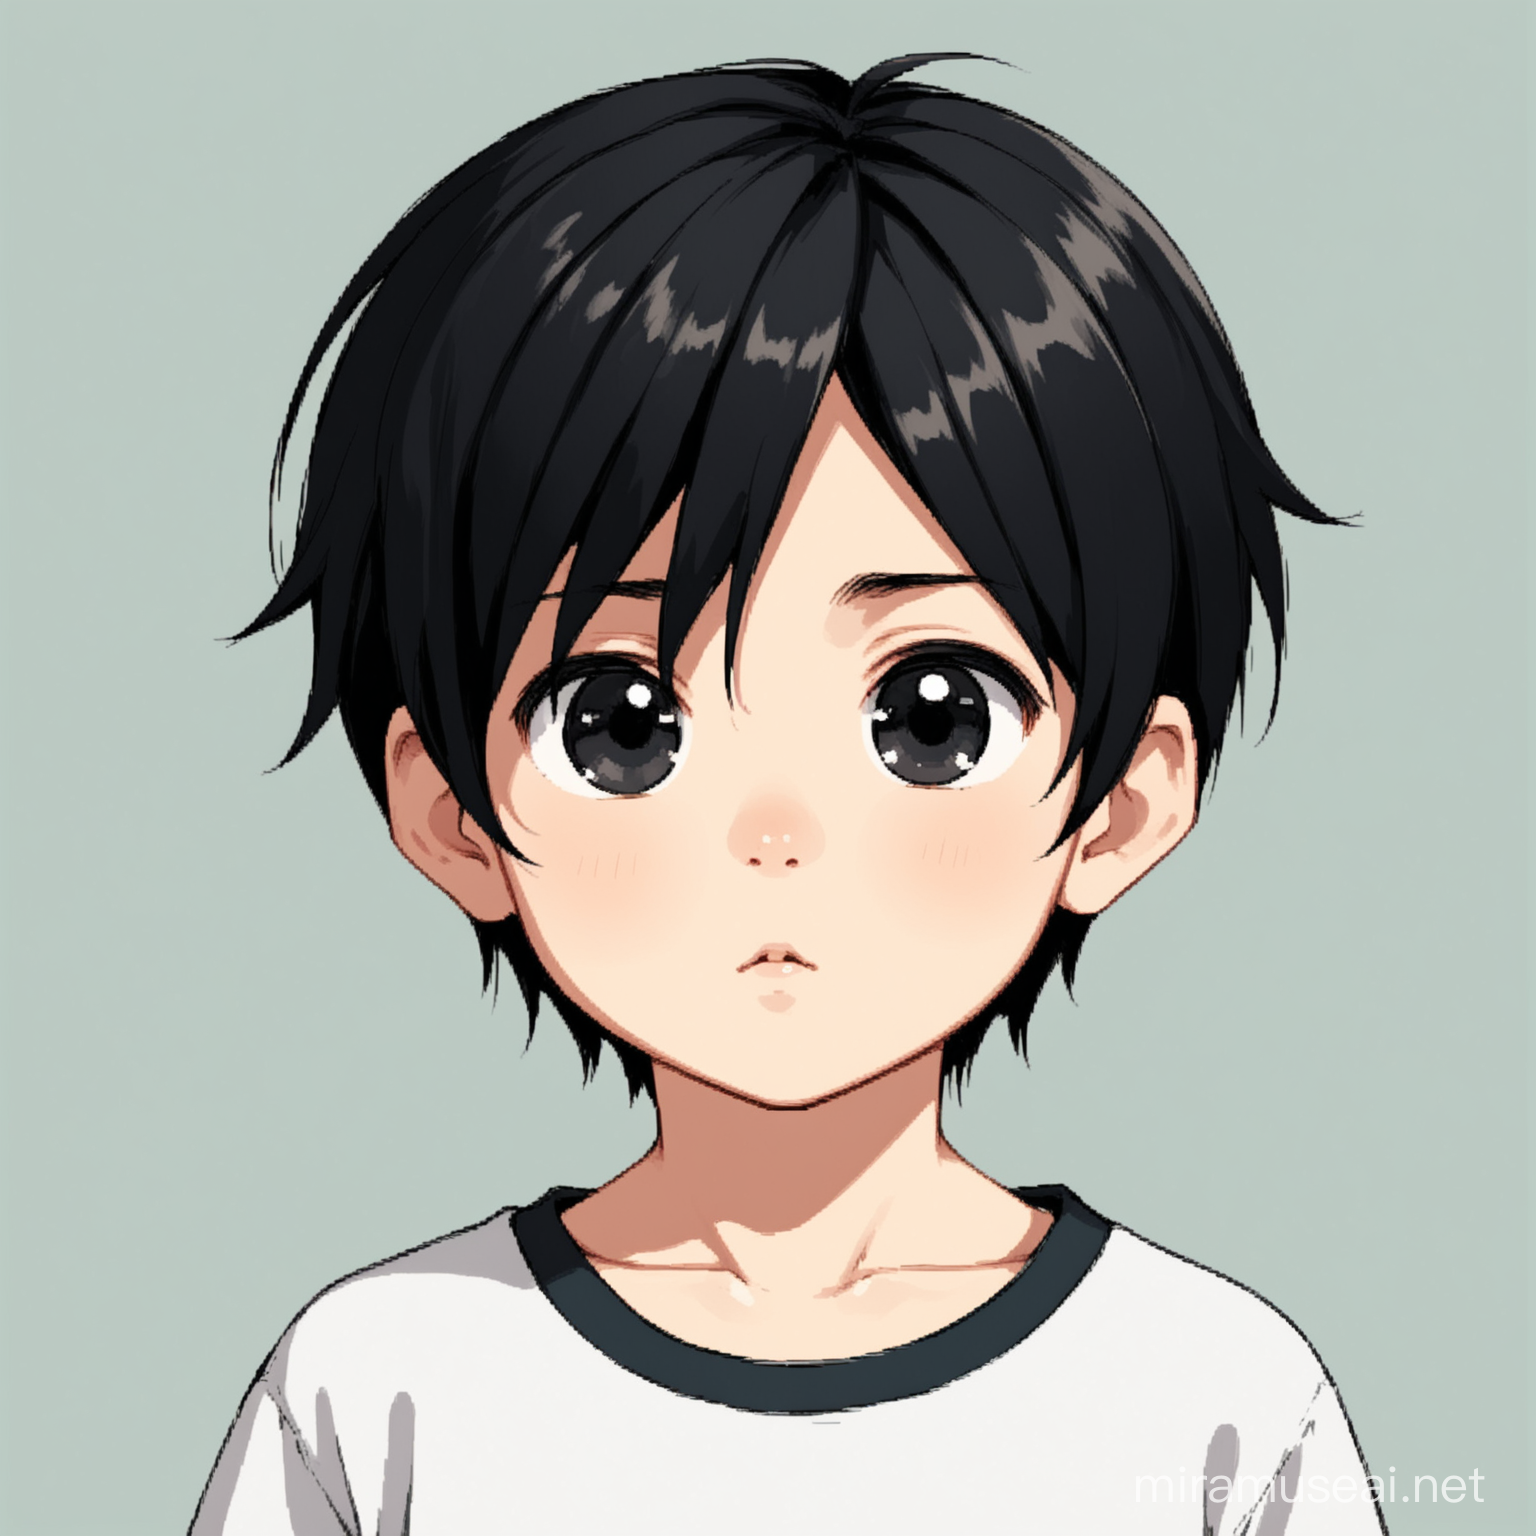 Adorable SixYearOld Boy with Black Hair and Bright Eyes